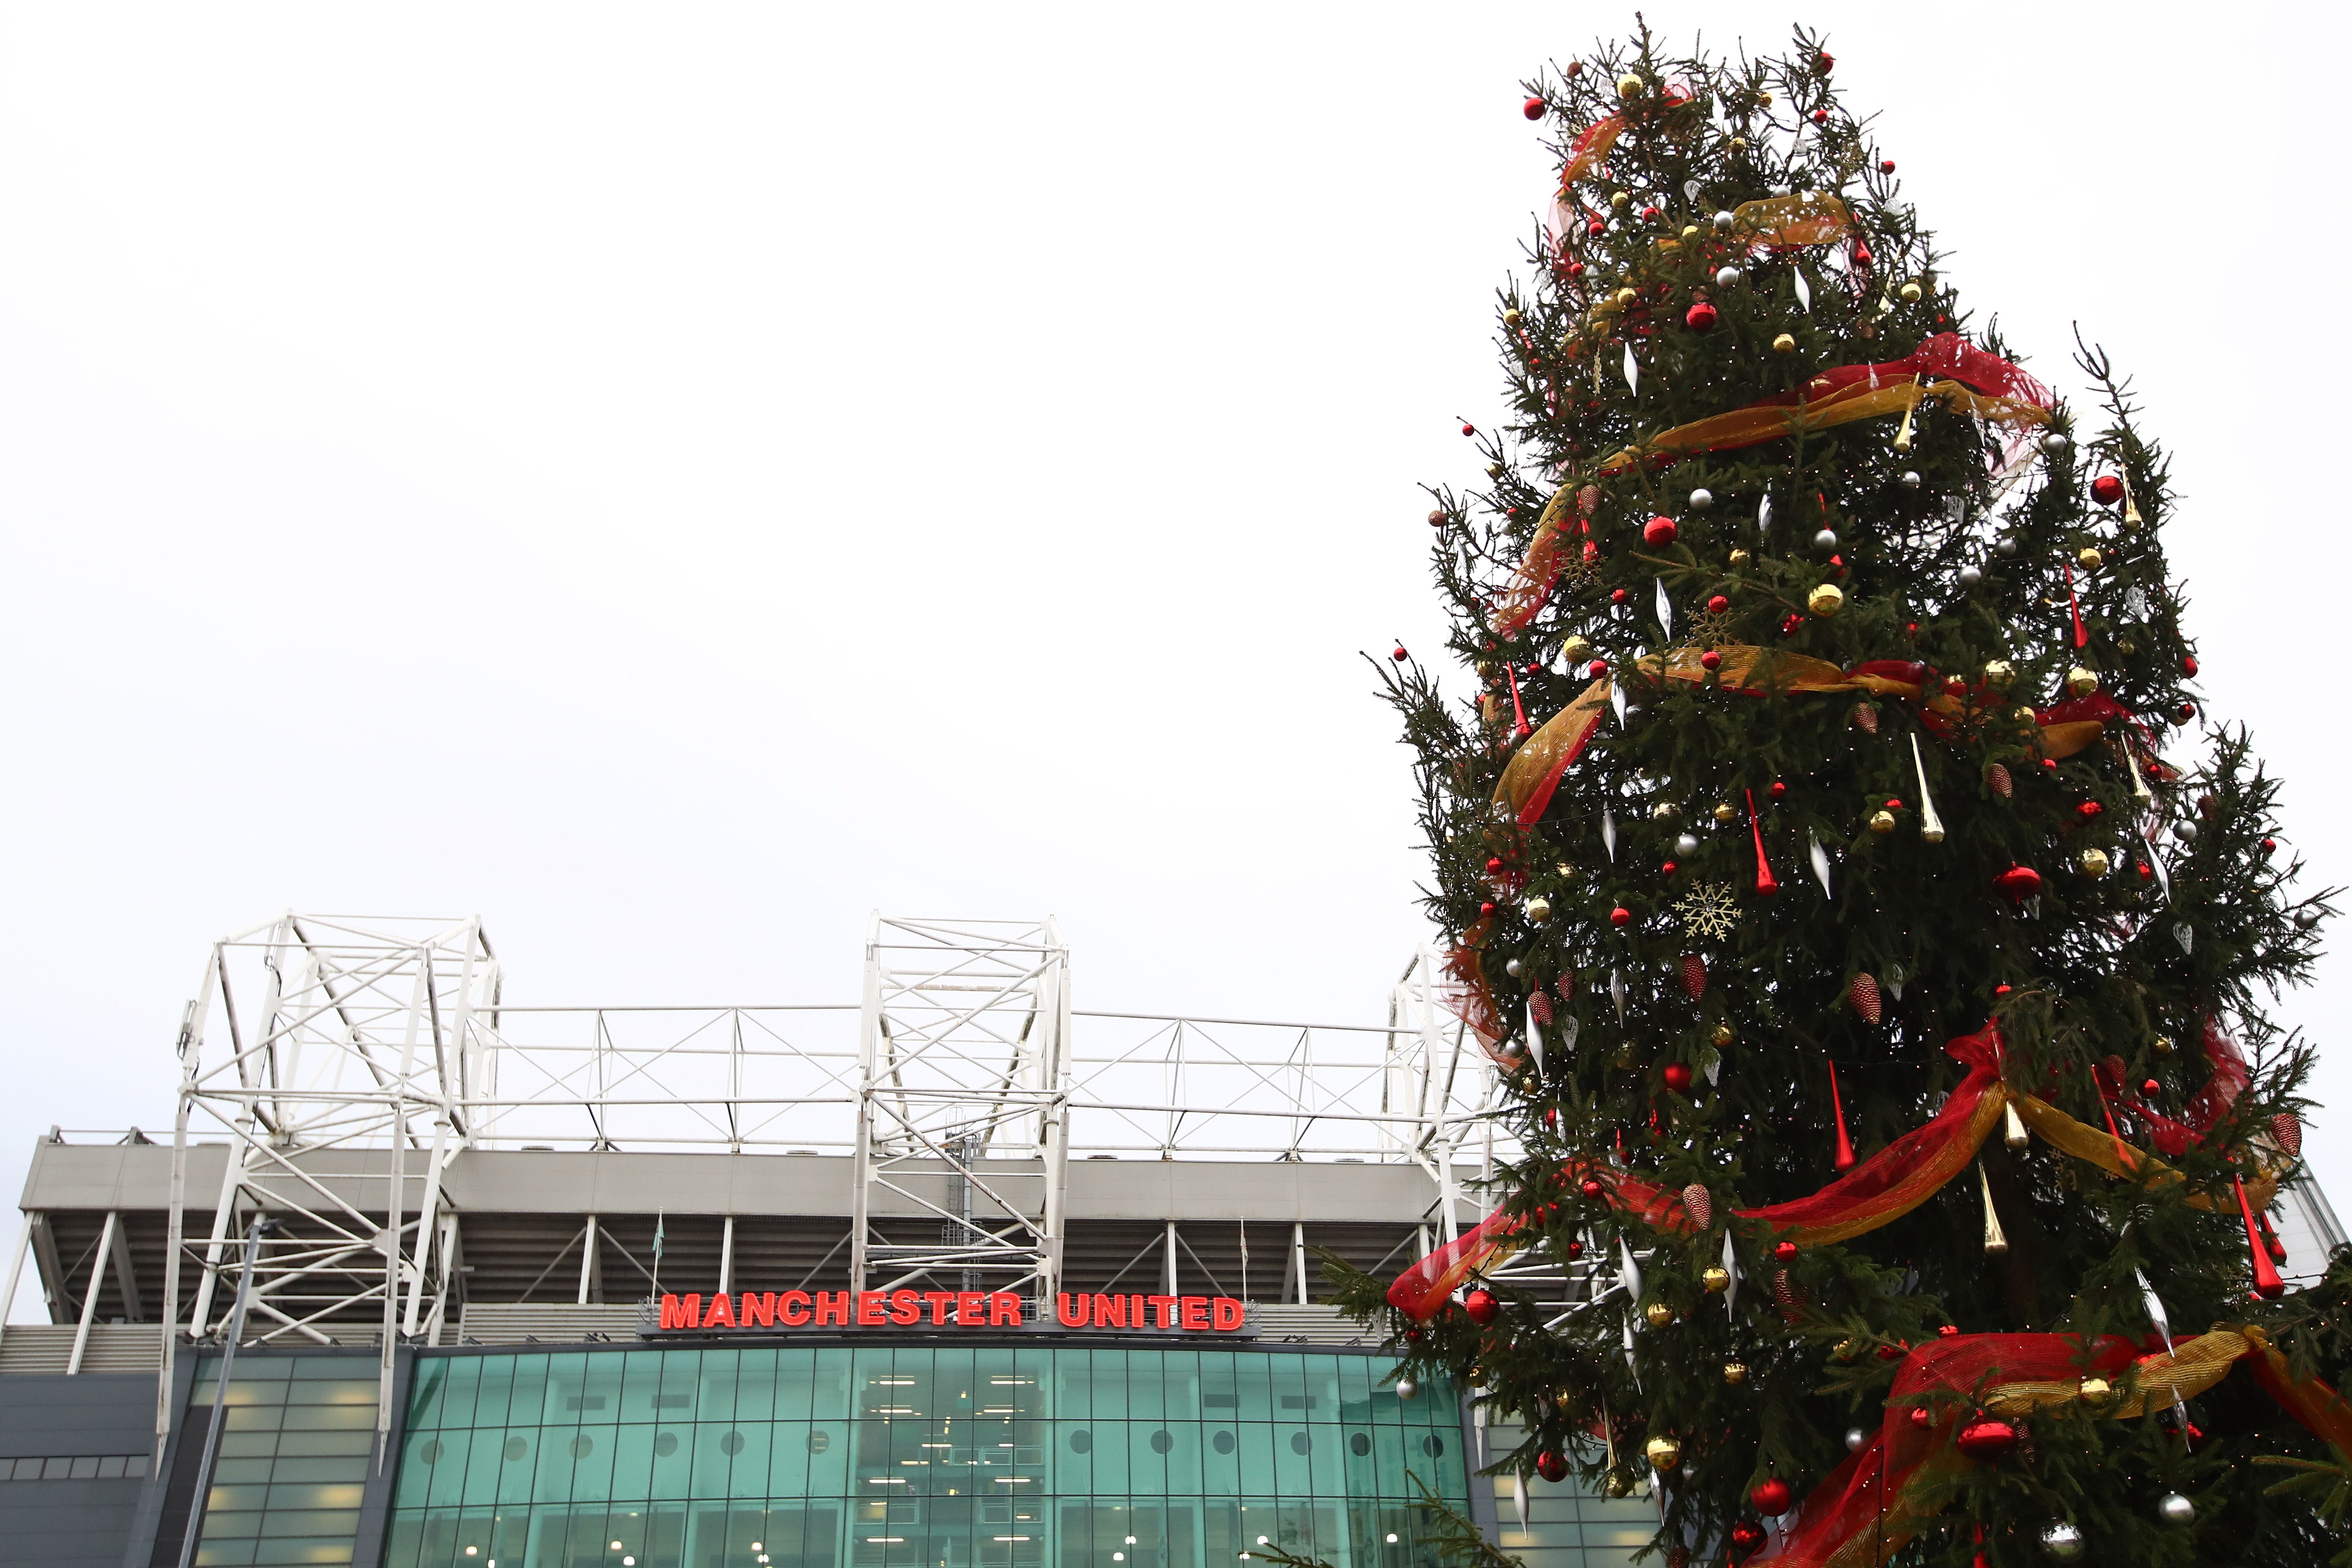 MANCHESTER, ENGLAND - DECEMBER 11:  A Christmas tree is seen outside the stadium prior to the Premier League match between Manchester United and Tottenham Hotspur at Old Trafford on December 11, 2016 in Manchester, England.  (Photo by Clive Brunskill/Getty Images)